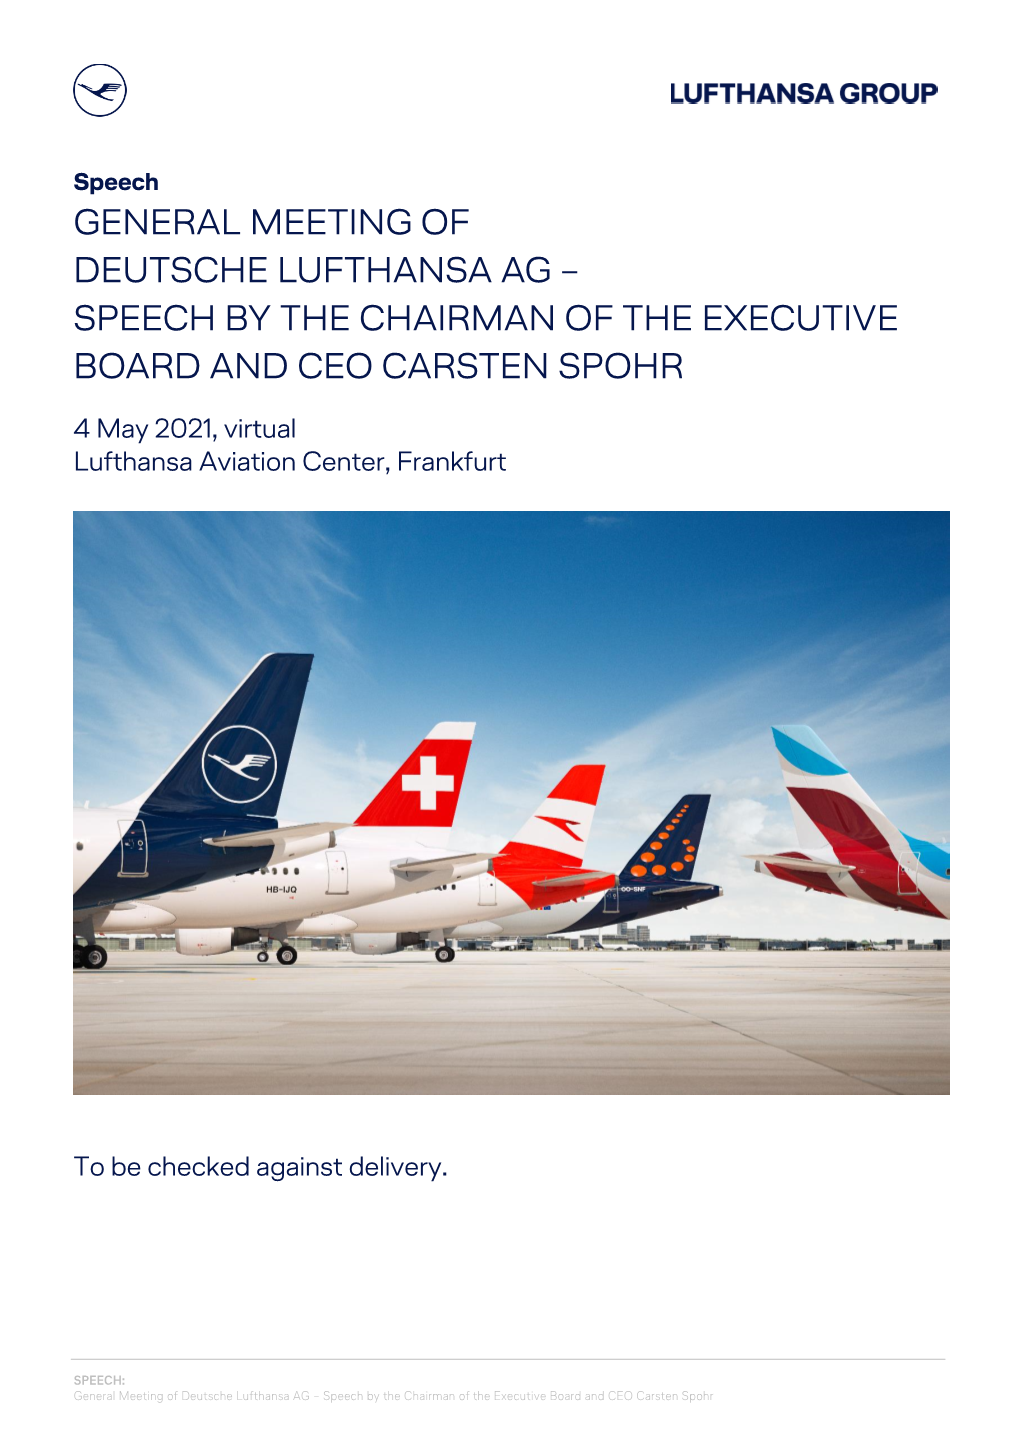 General Meeting of Deutsche Lufthansa Ag – Speech by the Chairman of the Executive Board and Ceo Carsten Spohr